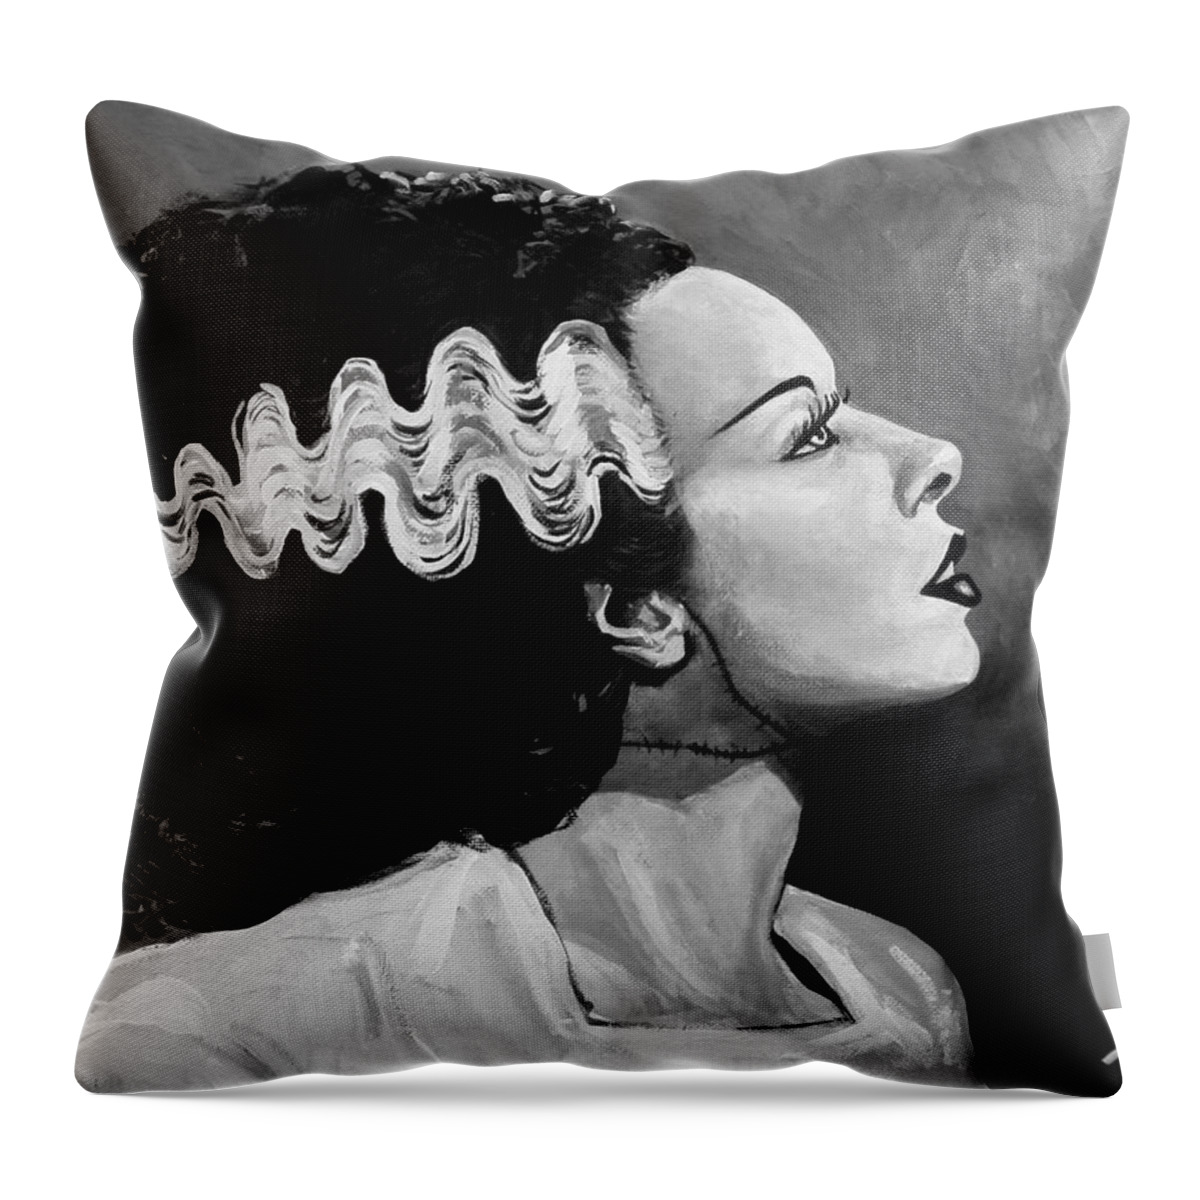 Bride Of Frankenstein Throw Pillow featuring the painting Bride by Tom Carlton